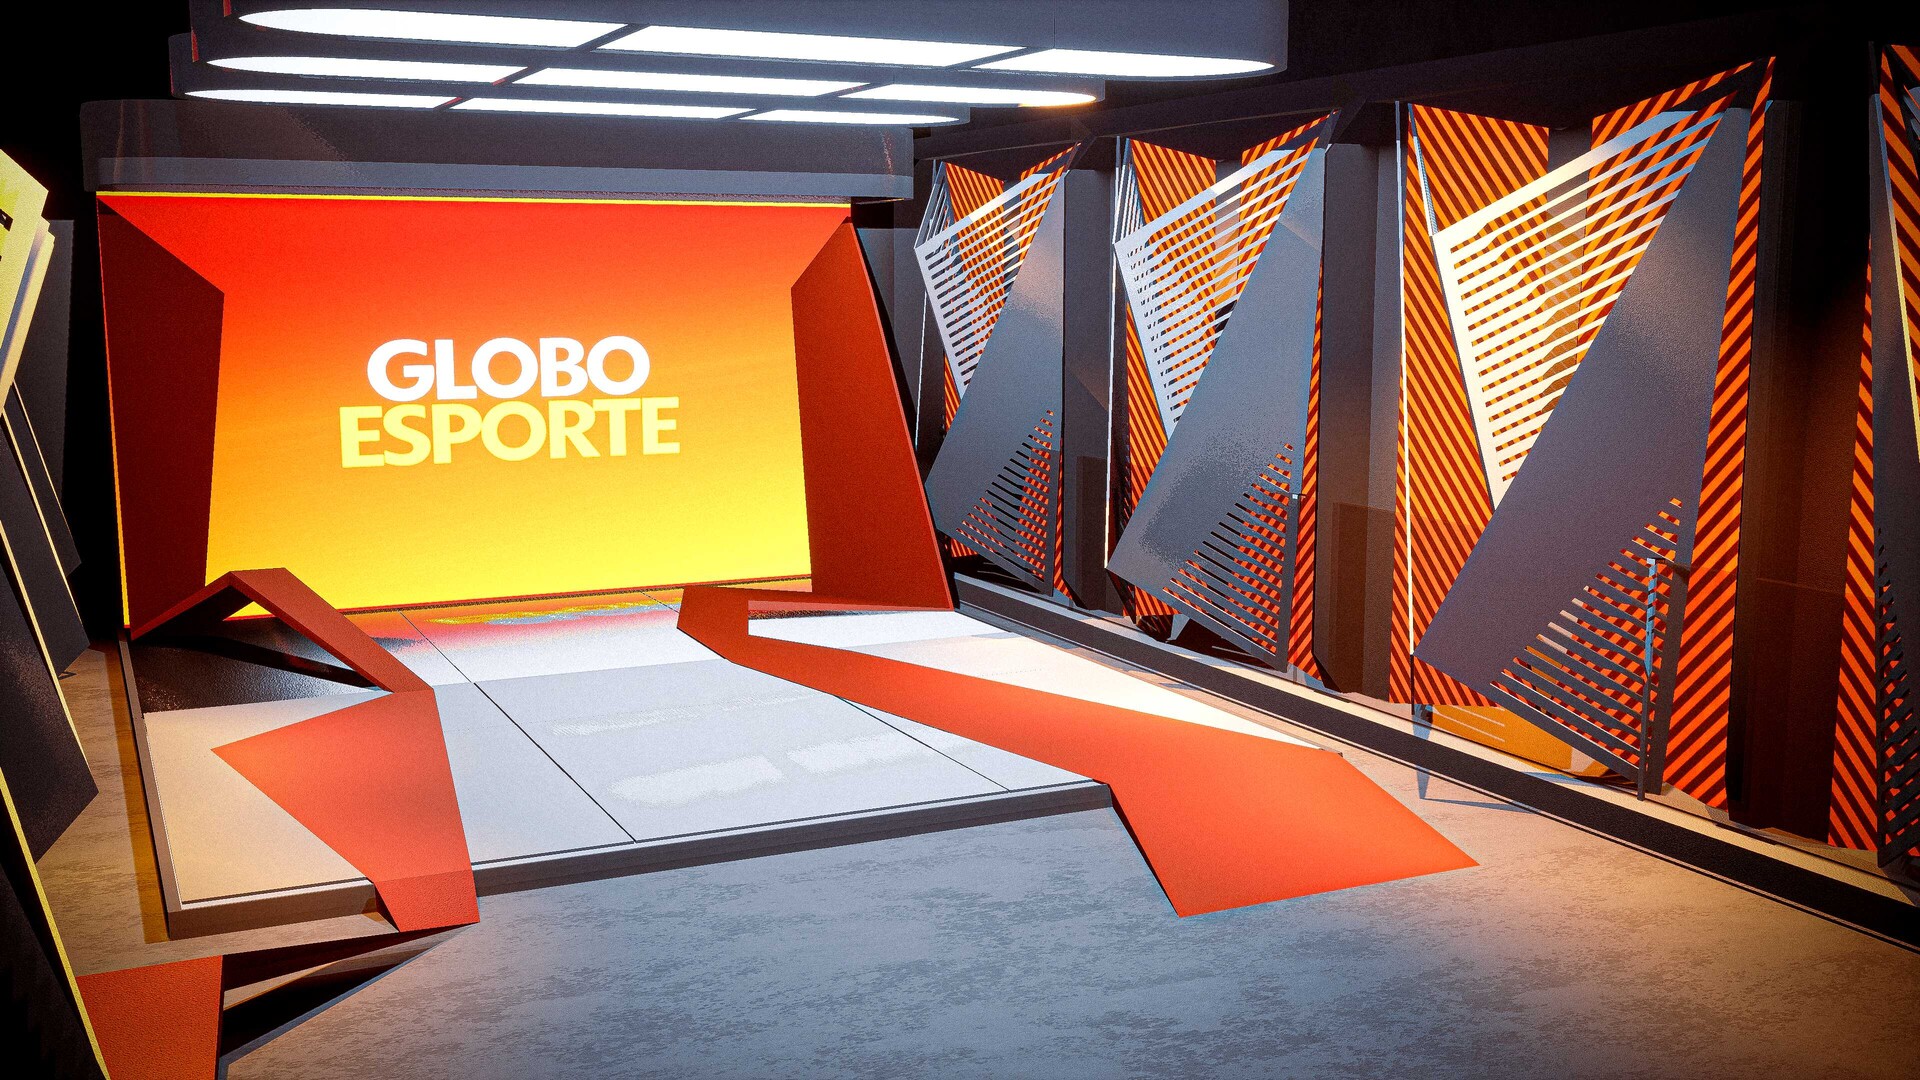 GloboNews Motion Graphics and Broadcast Design Gallery